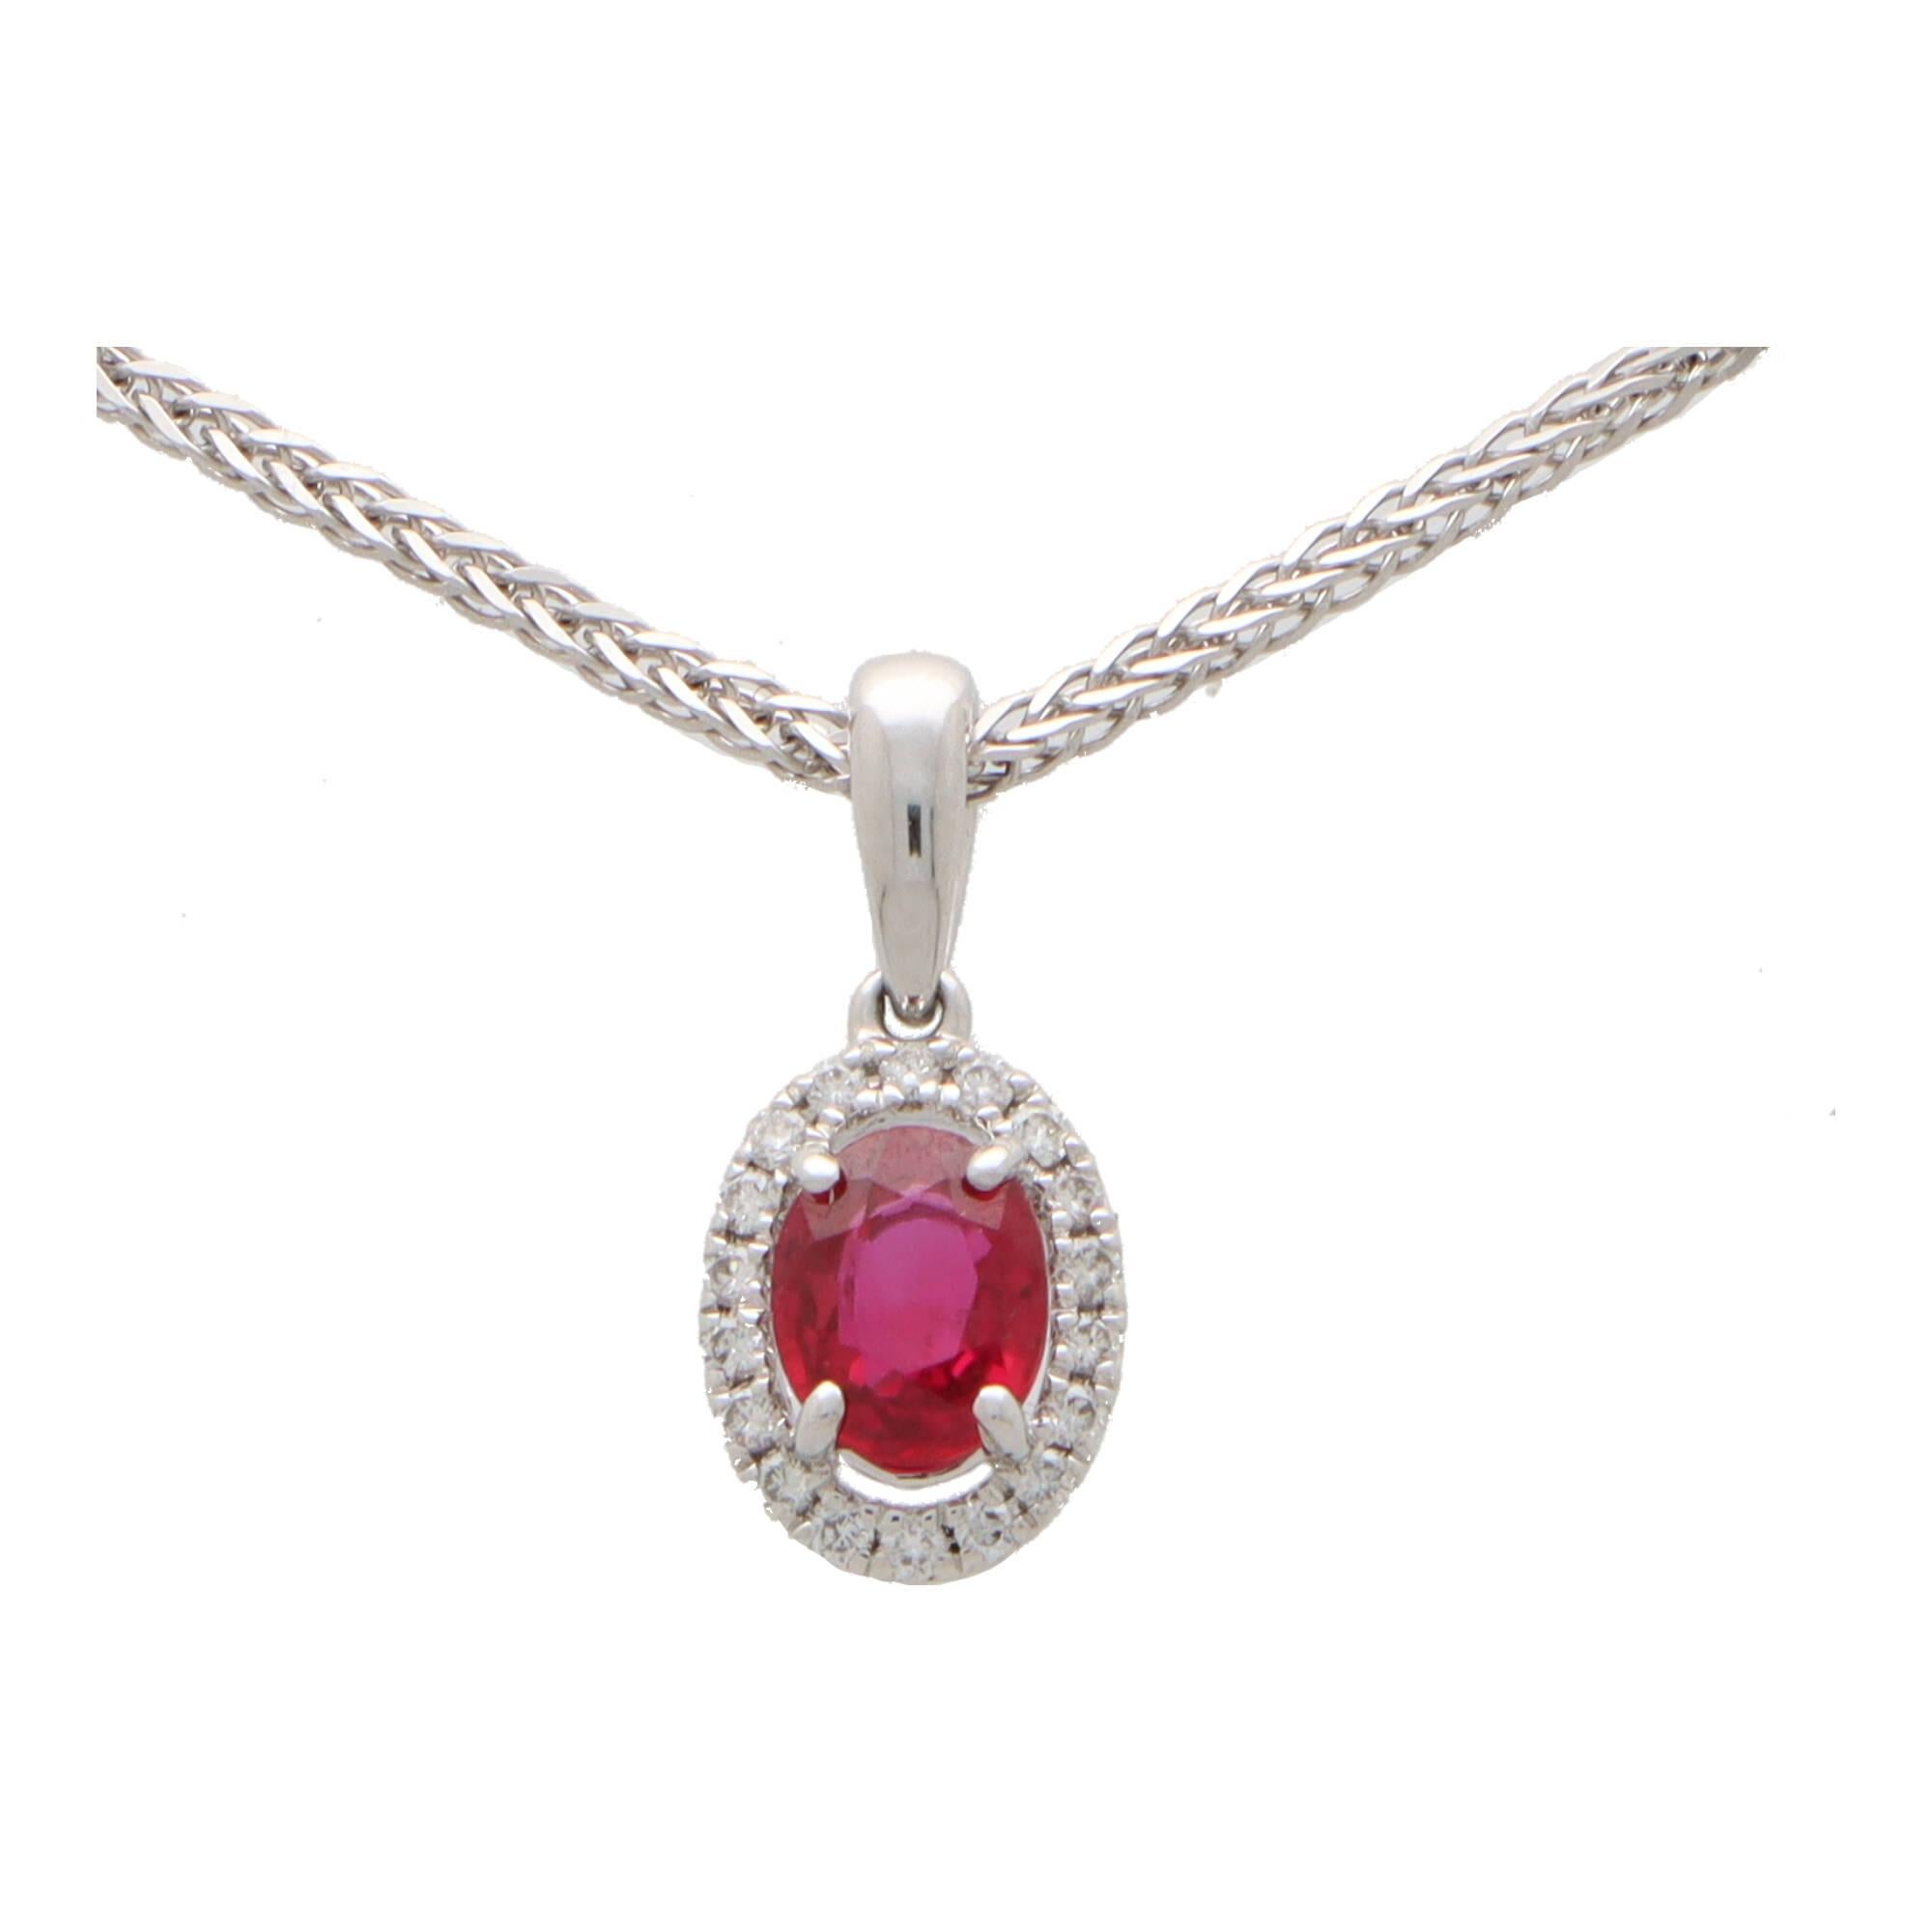  A beautiful oval cut ruby and diamond halo pendant set in 18k white gold.

The pendant is centrally set with a beautiful coloured red oval cut ruby which is surrounded by 18 sparkly round brilliant cut diamonds. The pendant hangs from a polished